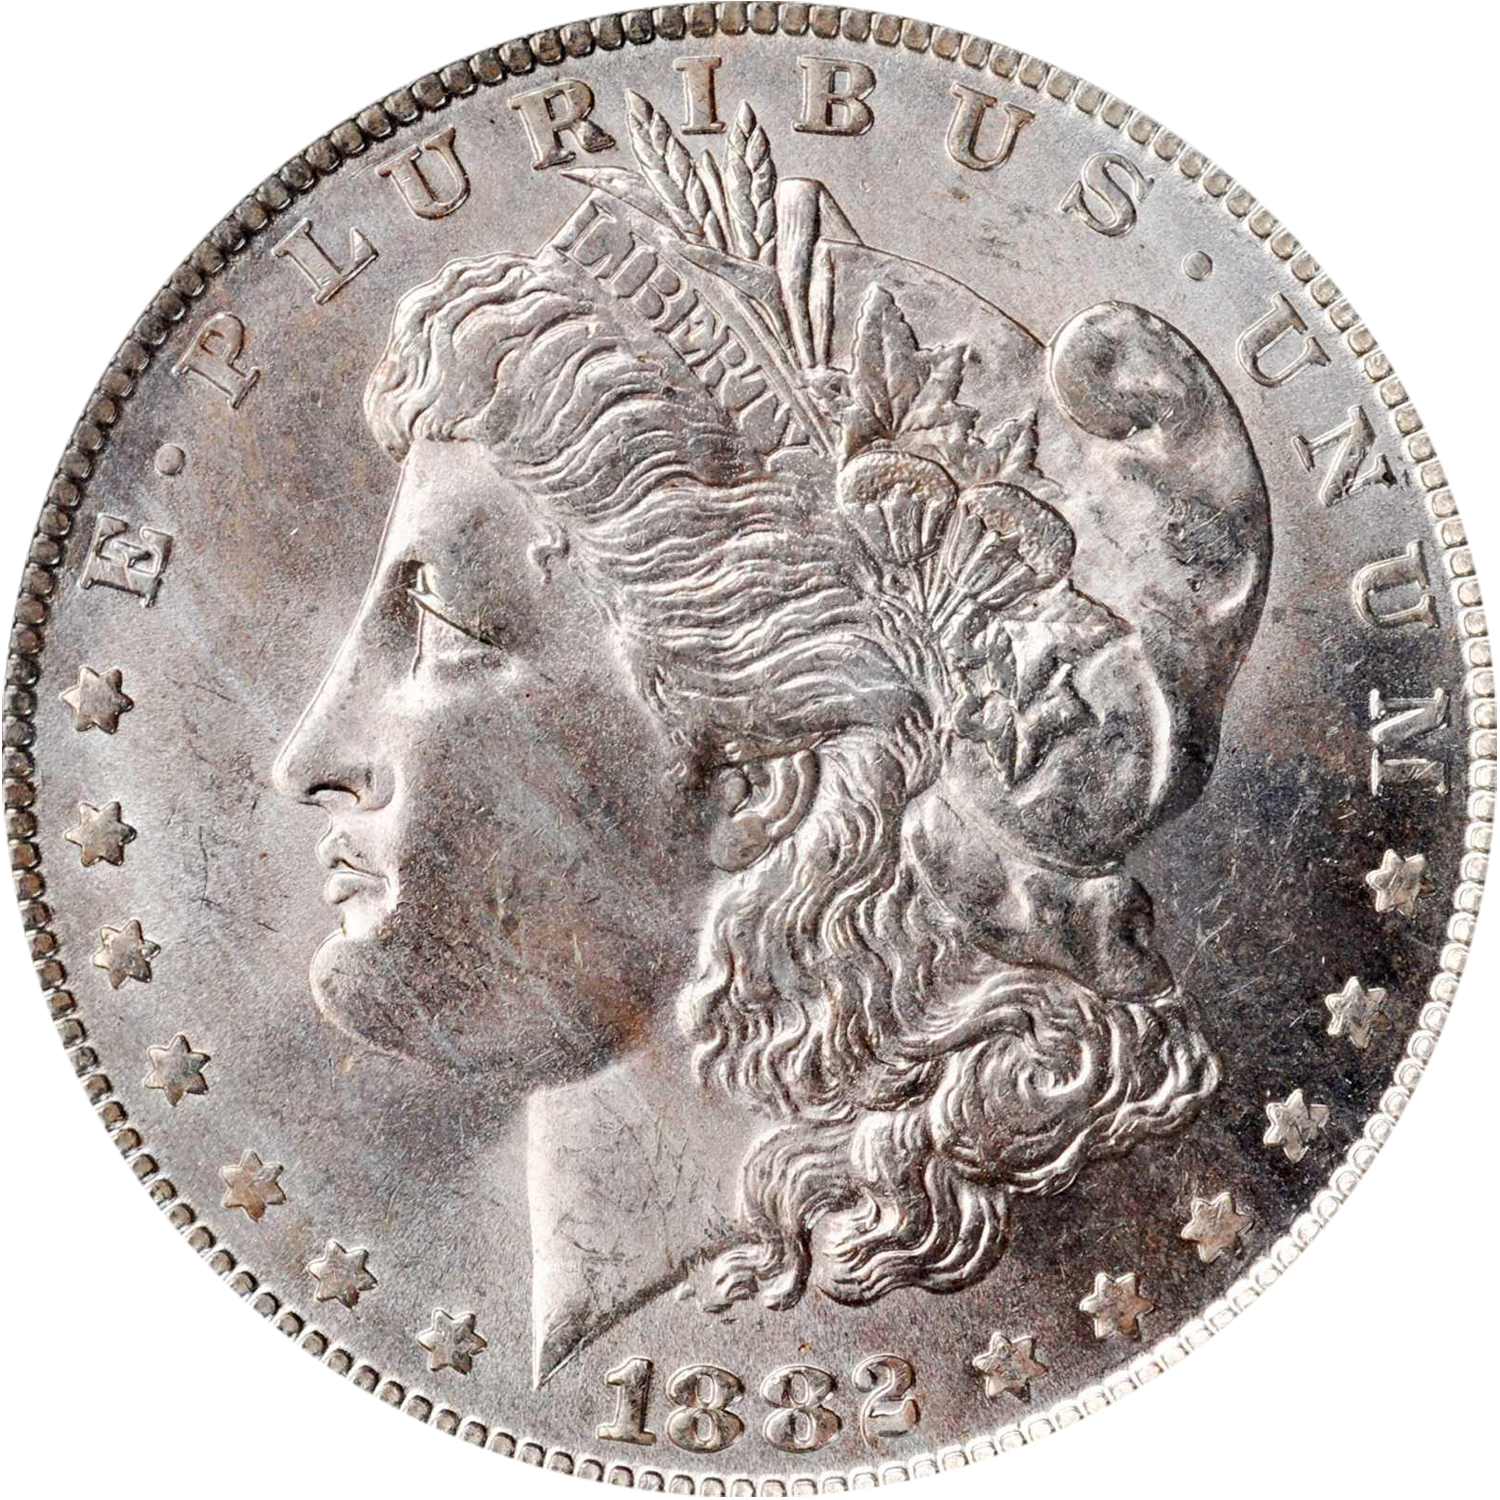 1882 new orleans over san francisco mintmark morgan dollar price guide value